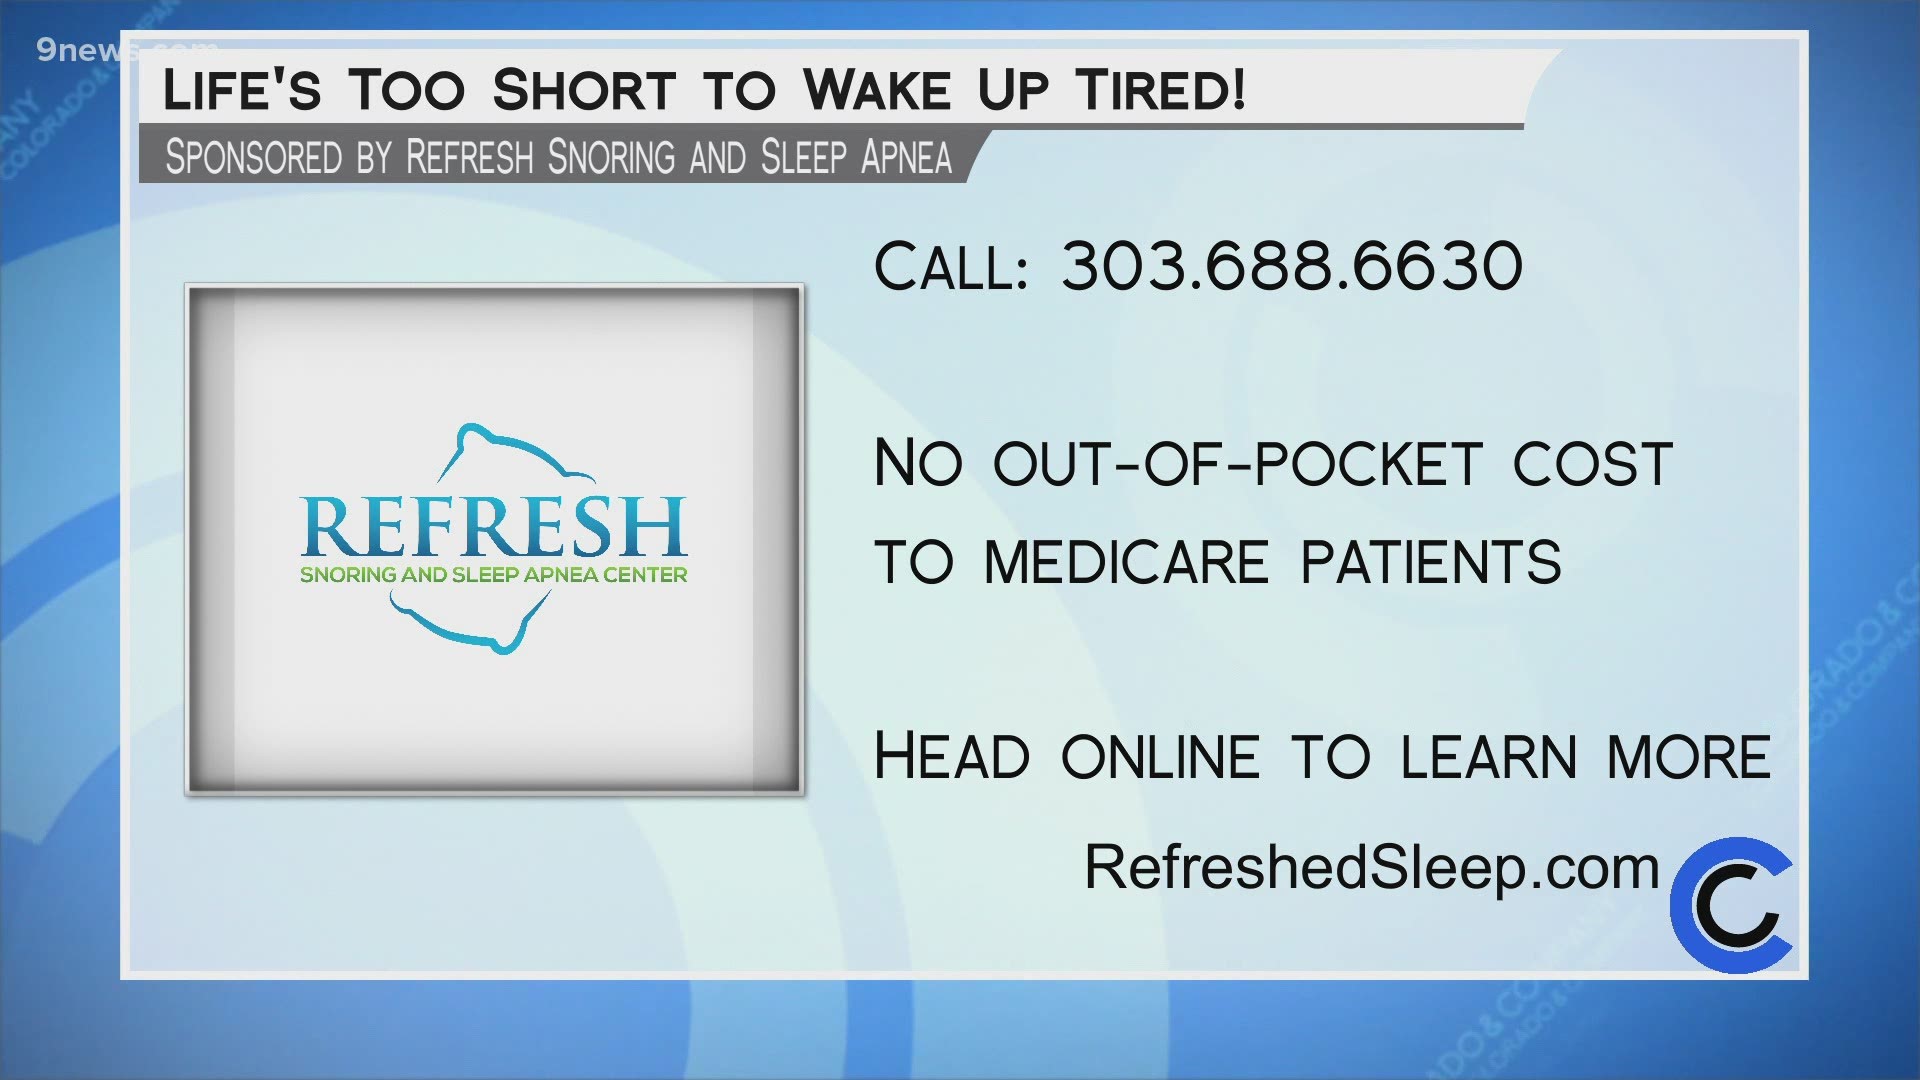 Call 303.688.6630 or visit RefreshedSleep.com to find options that can help you not wake up tired every morning.